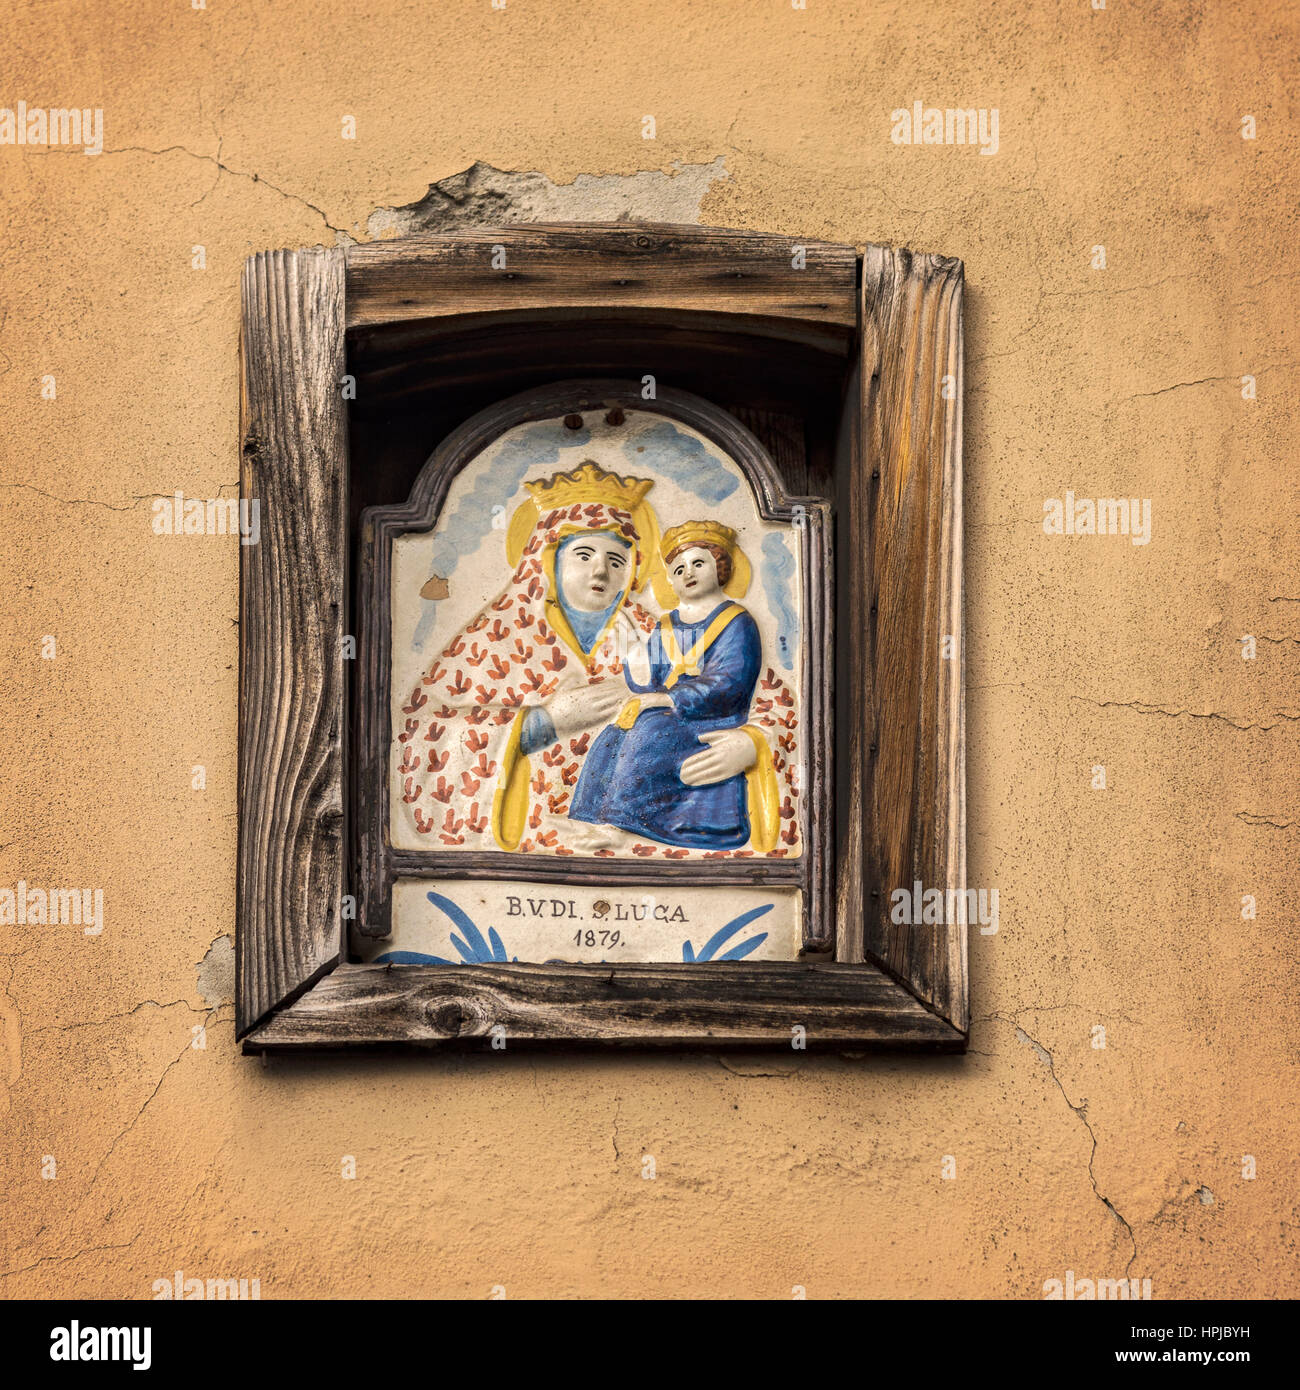 Image of a pictorial ceramic tile inside a building niche. Bologgna, Italy. Stock Photo